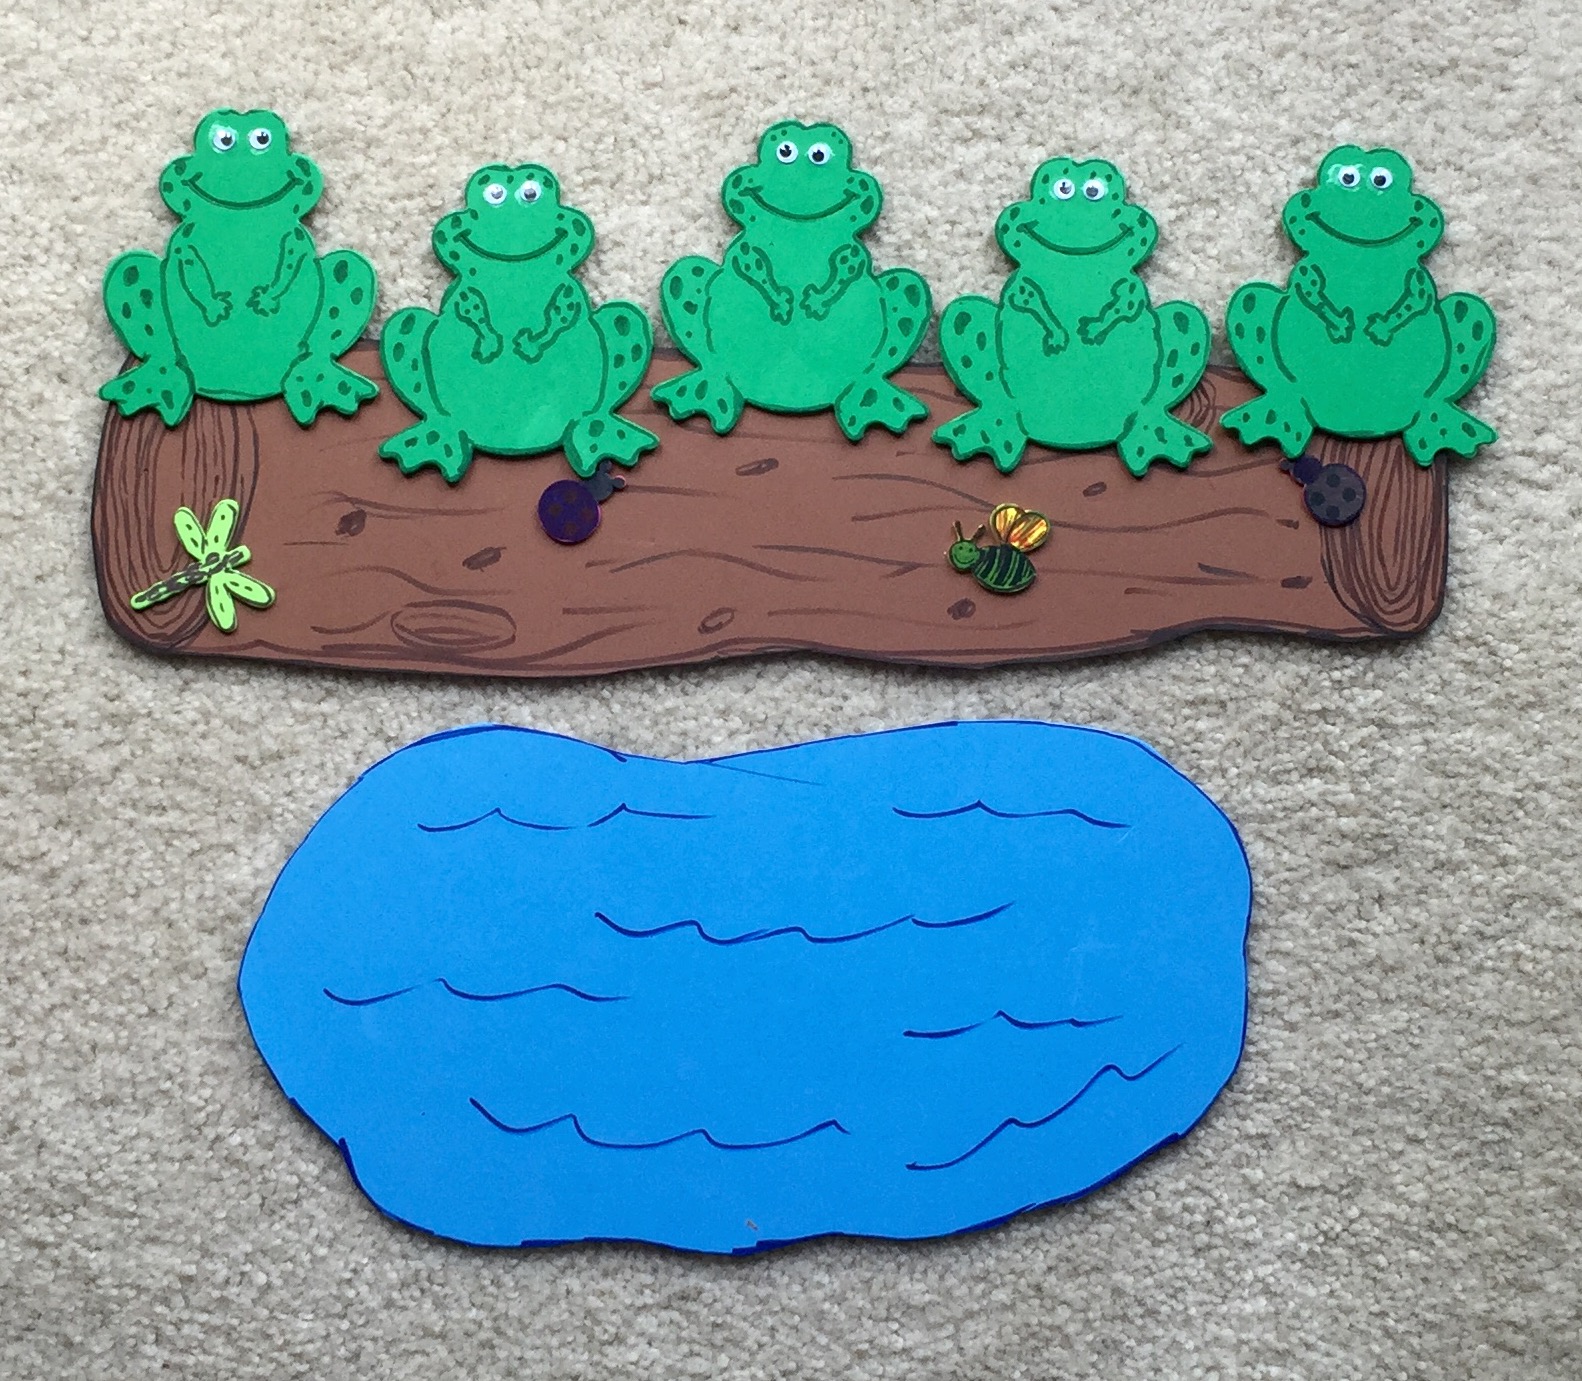 Adventures In Storytime (and Beyond): Five Green & Speckled Frogs, Five